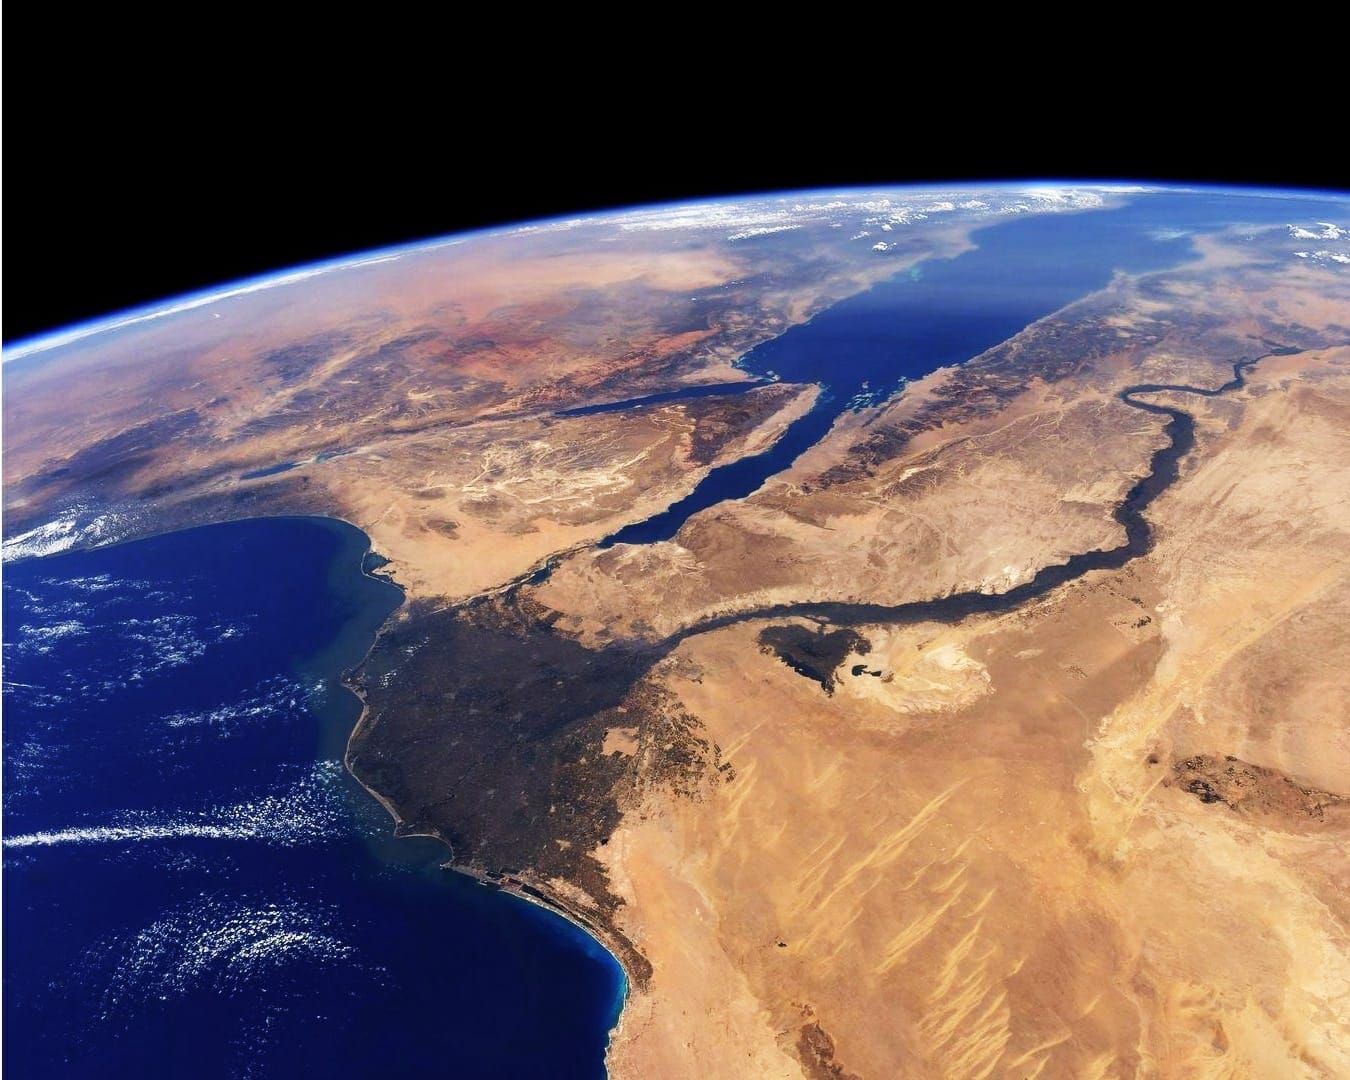 Nile delta from Space